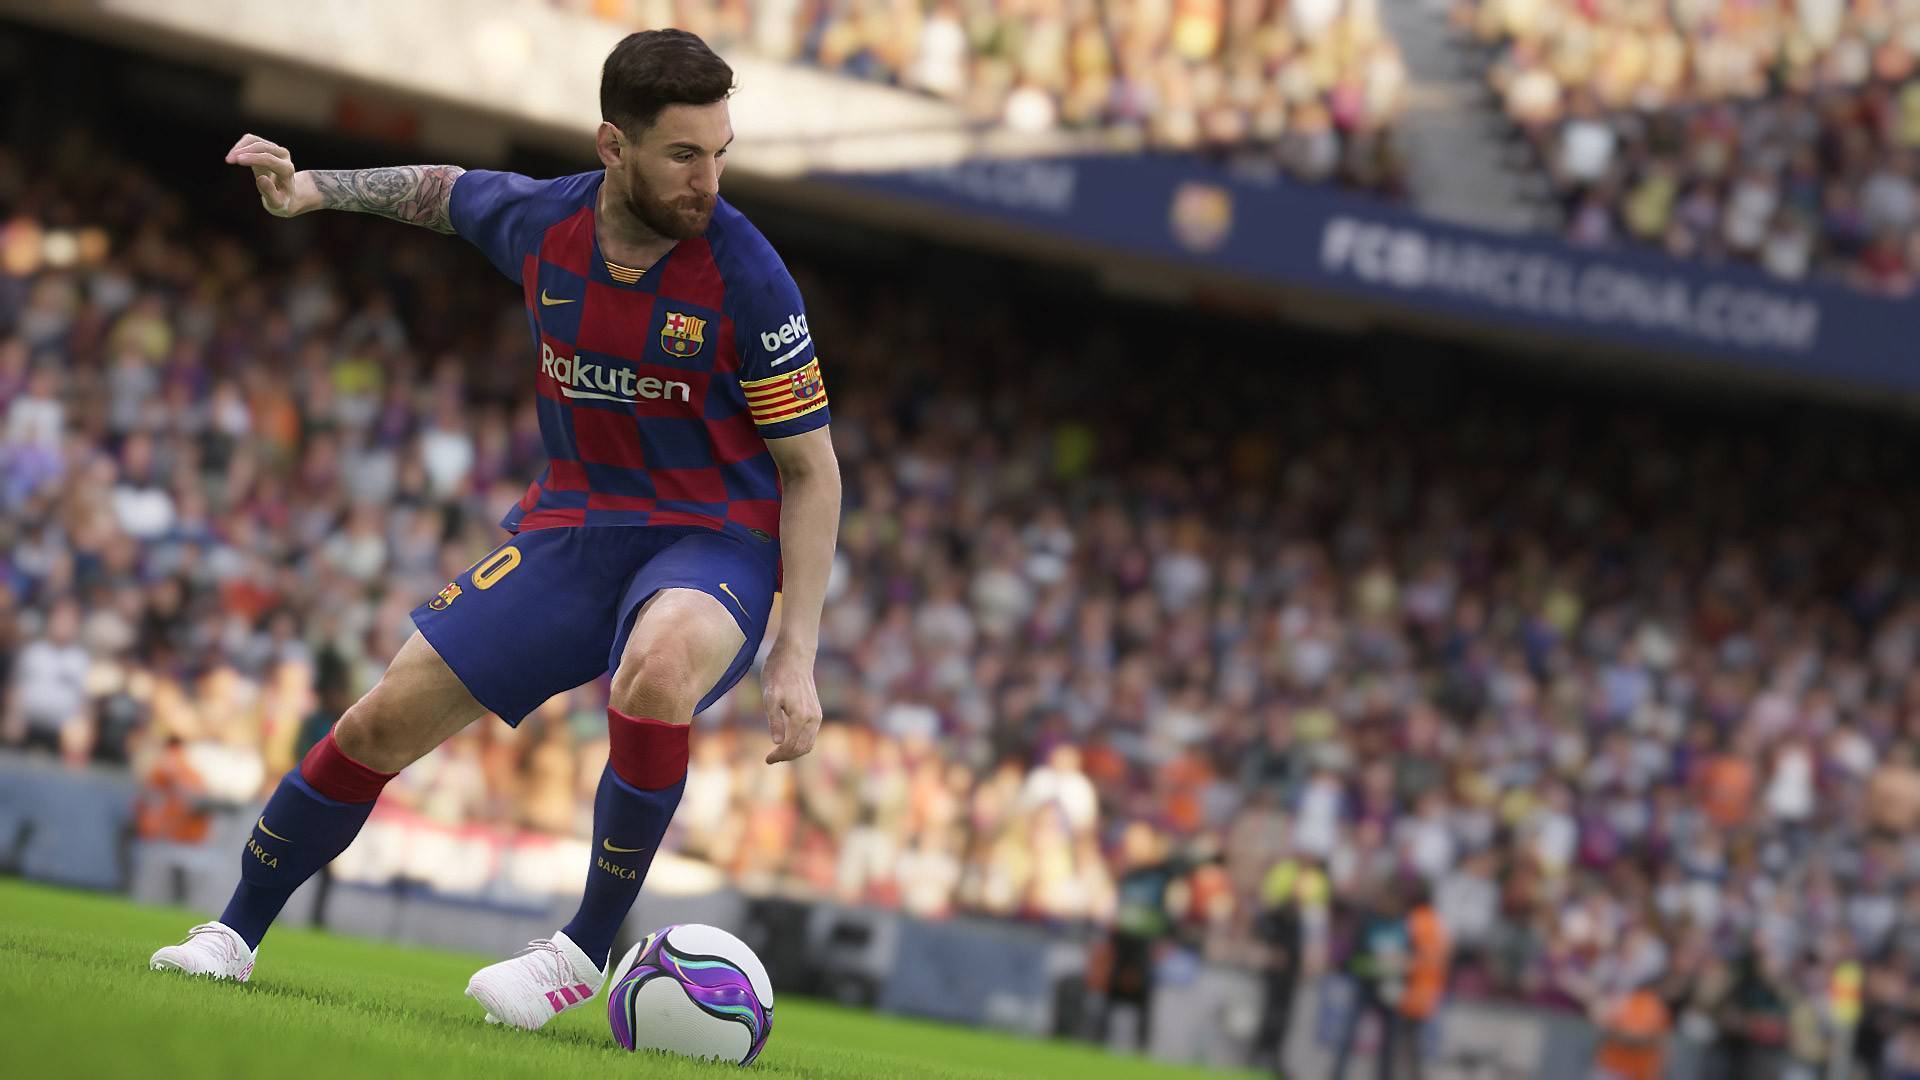 eFootball PES 2020 (PS4) cheap Price of $5.82